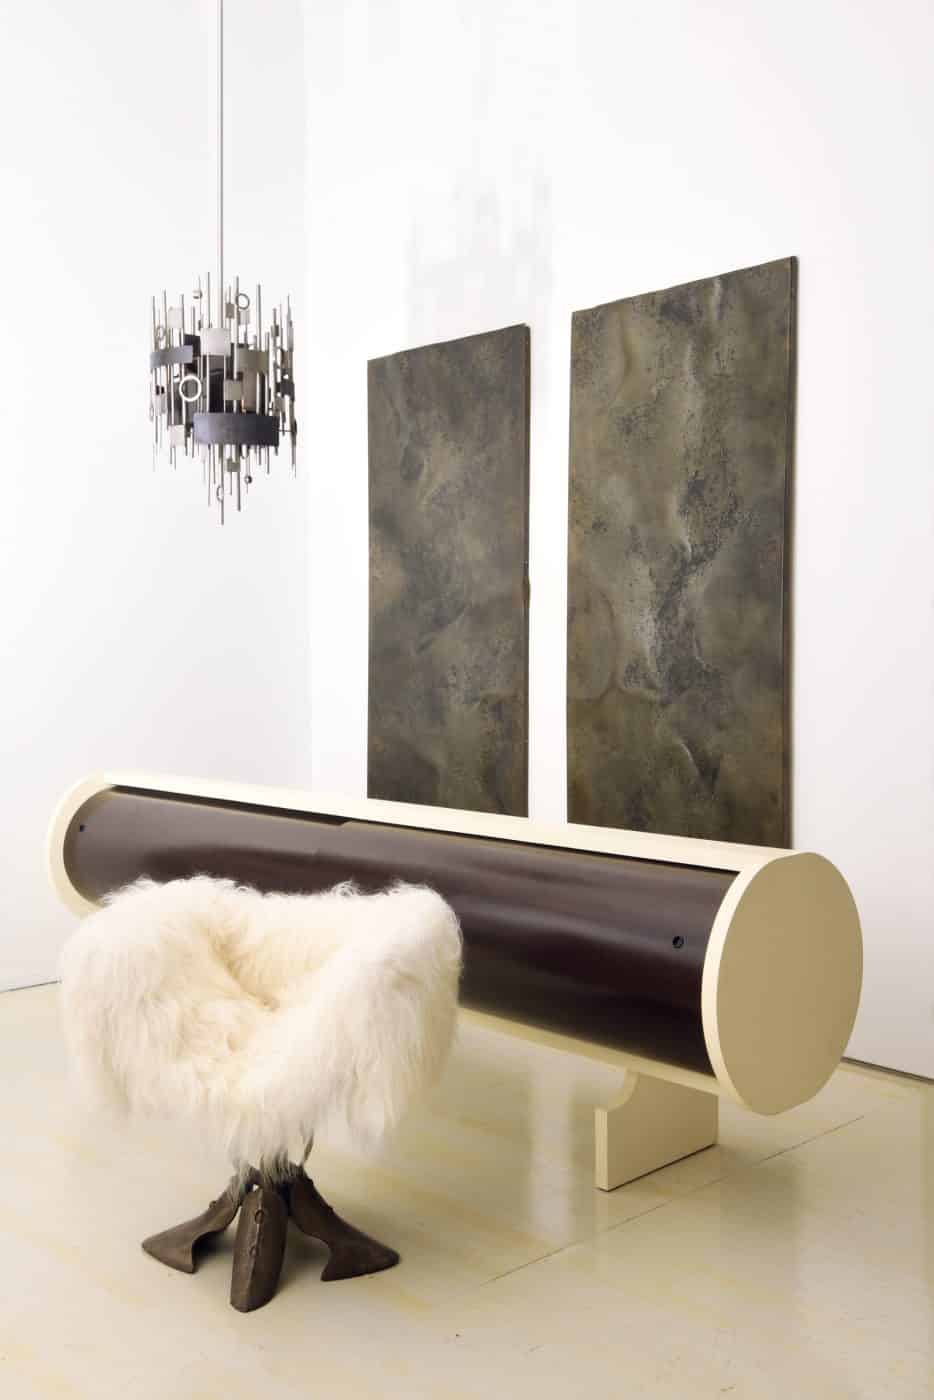 An Alain Douillard pendant, a pair of wall panels by Pierre Sabatier, a Jean-Louis Chanéac sideboard and a 1970s or '80s goatskin chair at Magen H Gallery's 2019 show “50 Years of French Design”